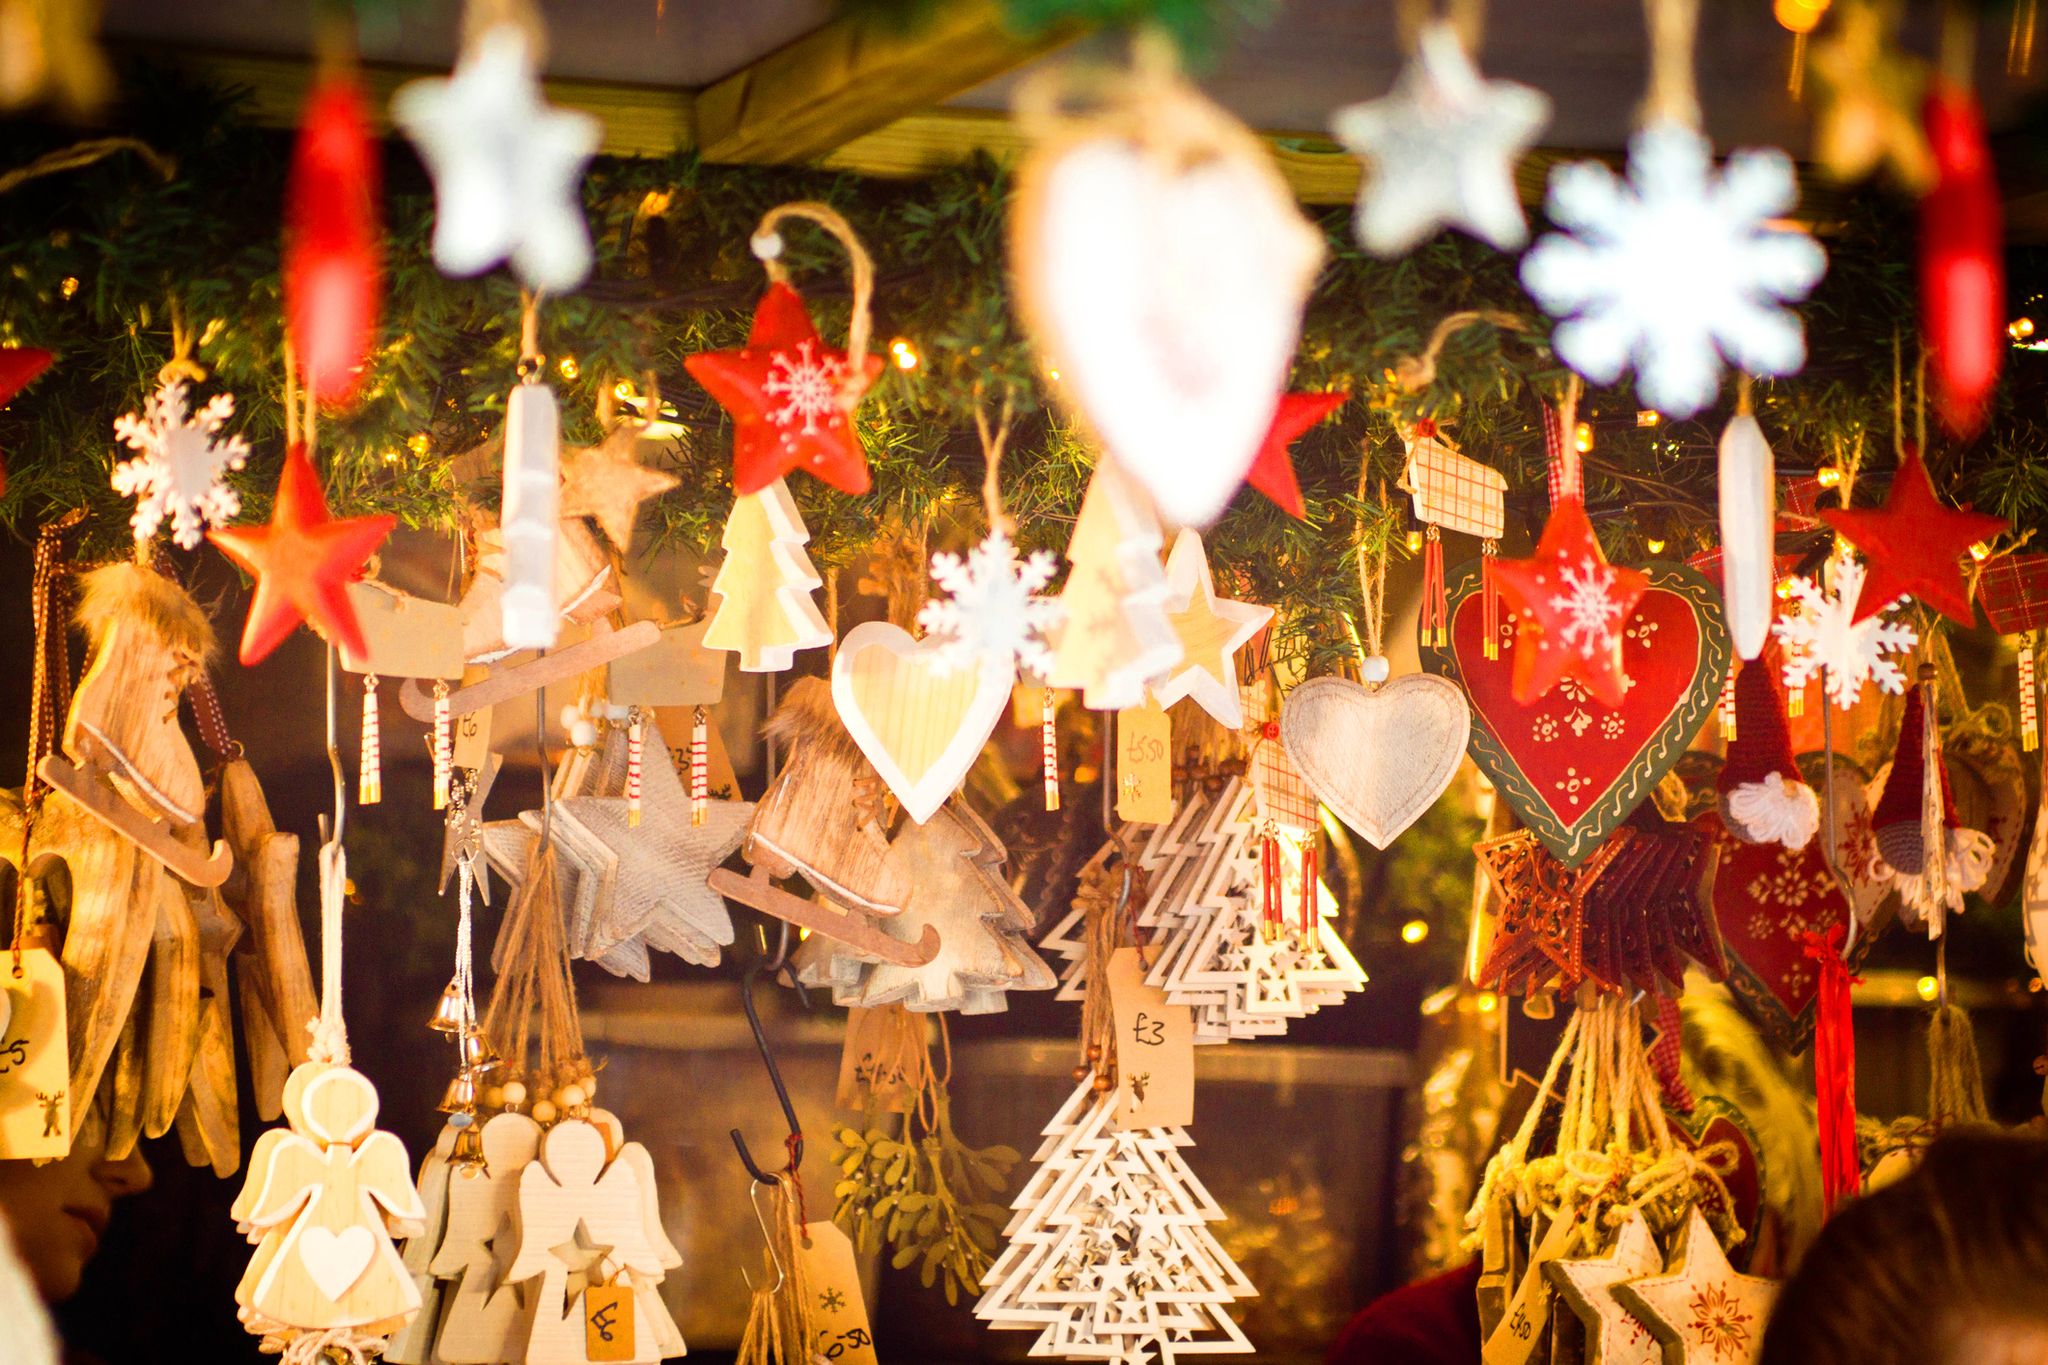 shaped hanging ornaments to act as christmas decorations on sale at lincoln christmas market they are in the shape of stars, christmas trees, angels and hearts